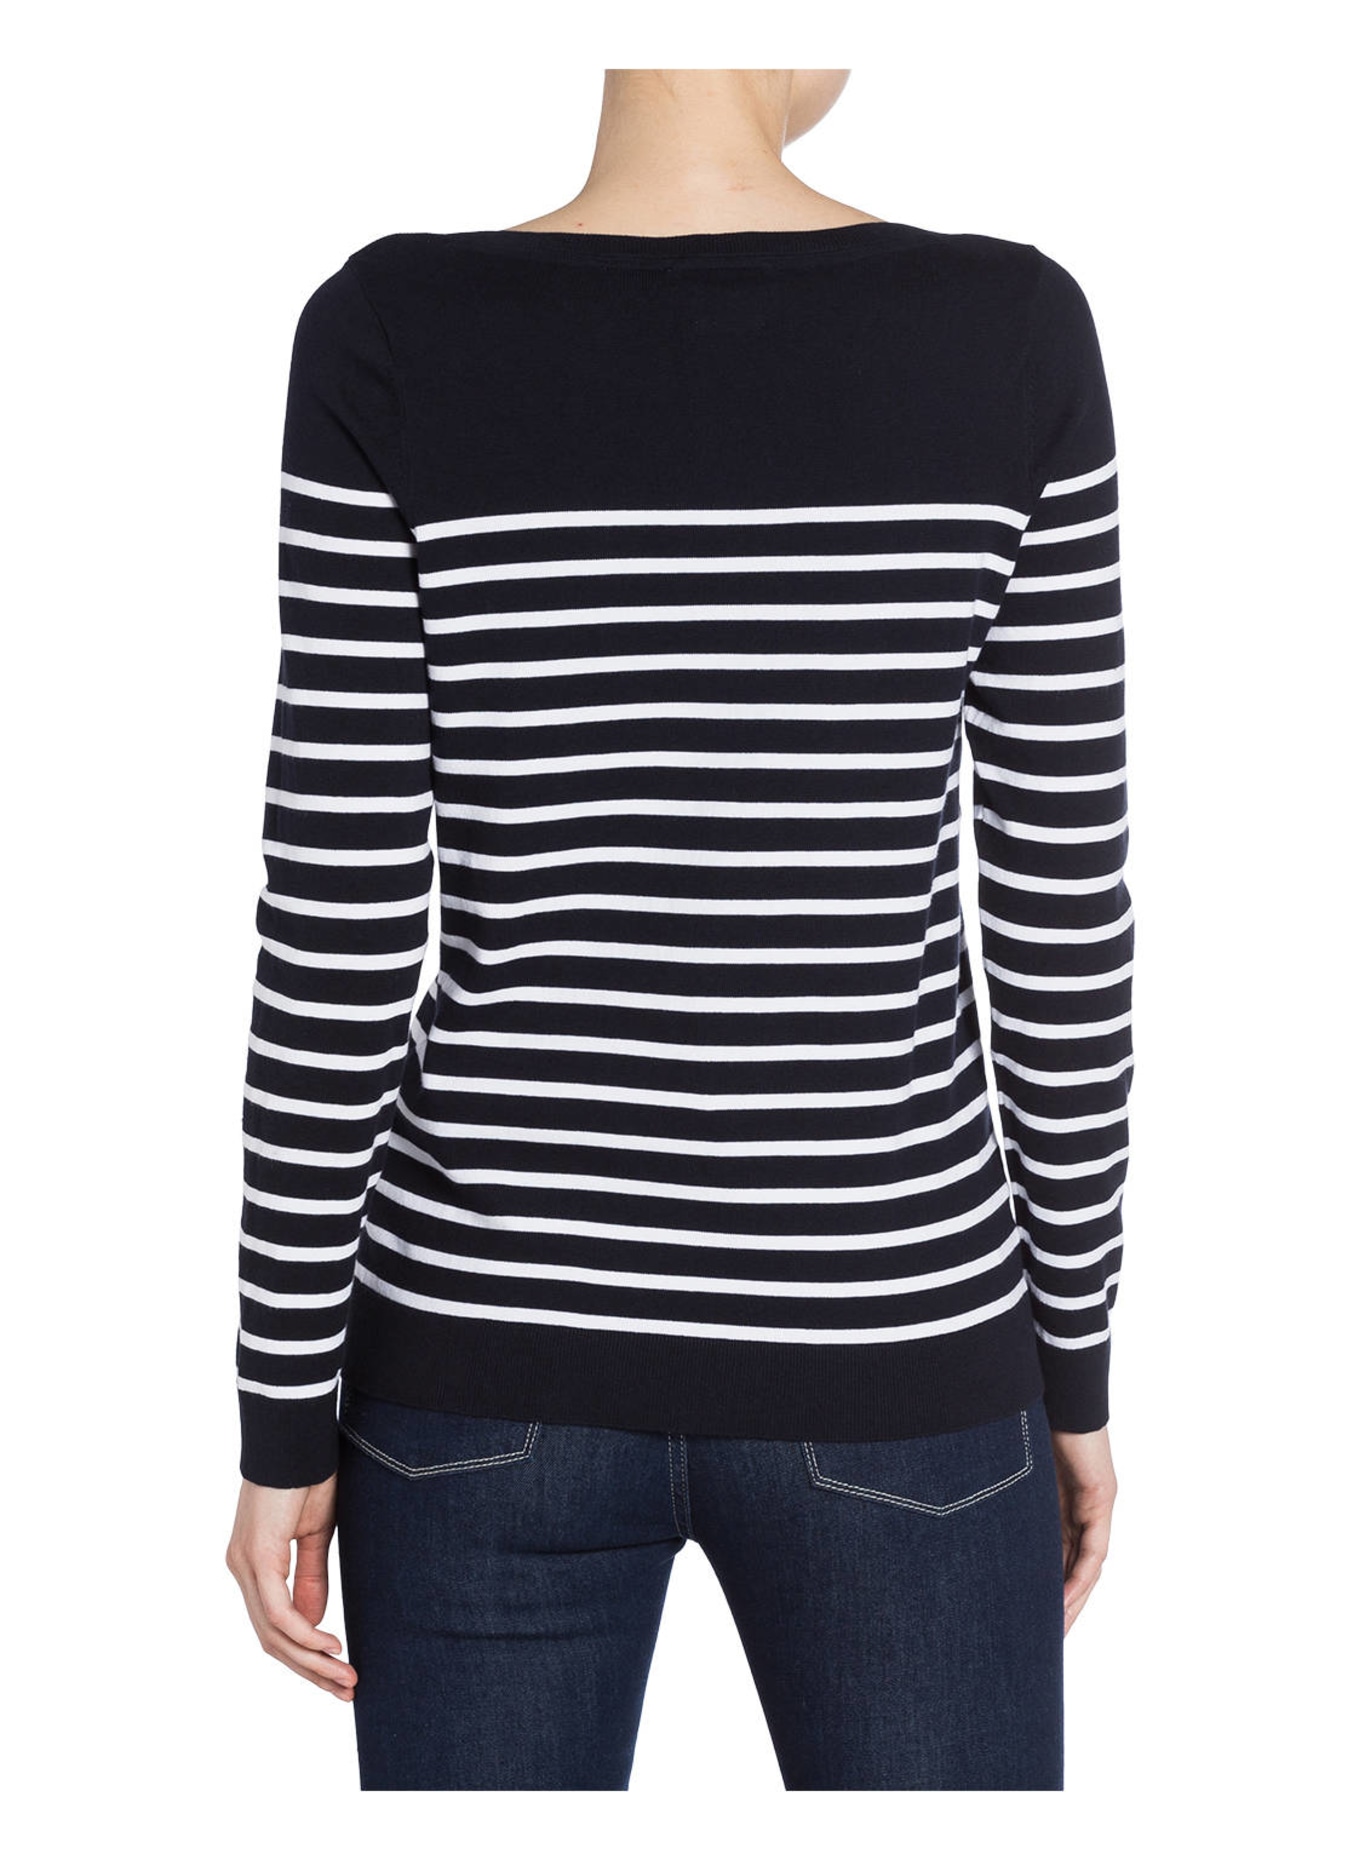 TOMMY HILFIGER Sweater NEW IVY, Color: DARK BLUE/ WHITE STRIPED (Image 3)